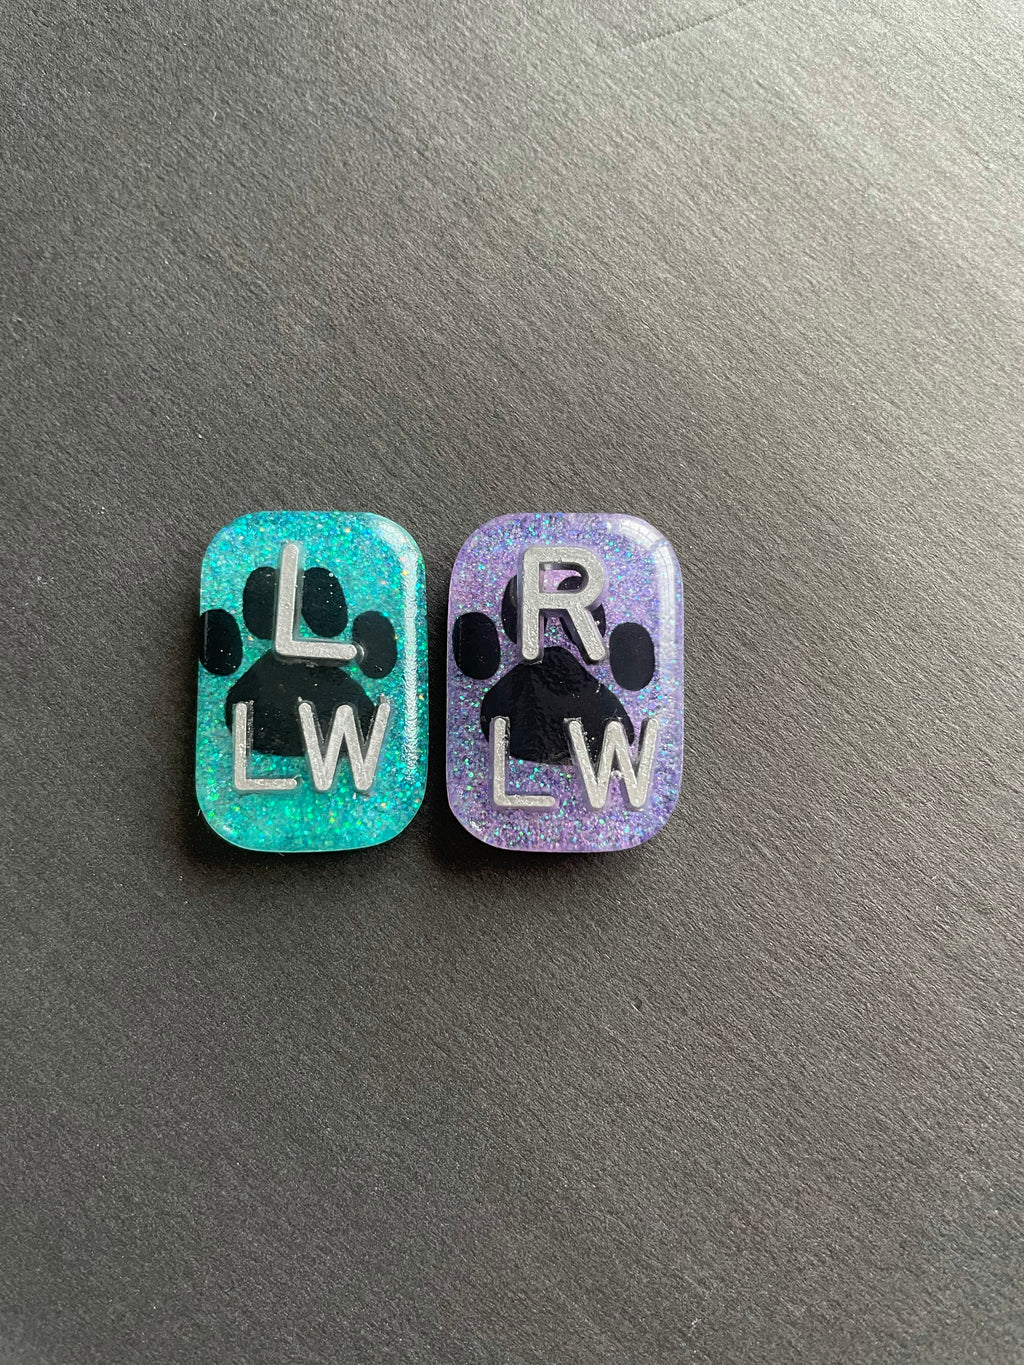 Paw Print Xray Markers, 2 or 3 Initials, Dog Lover, Pet, Animal, Small Rectangle, Glitter, Cute Xray Markers